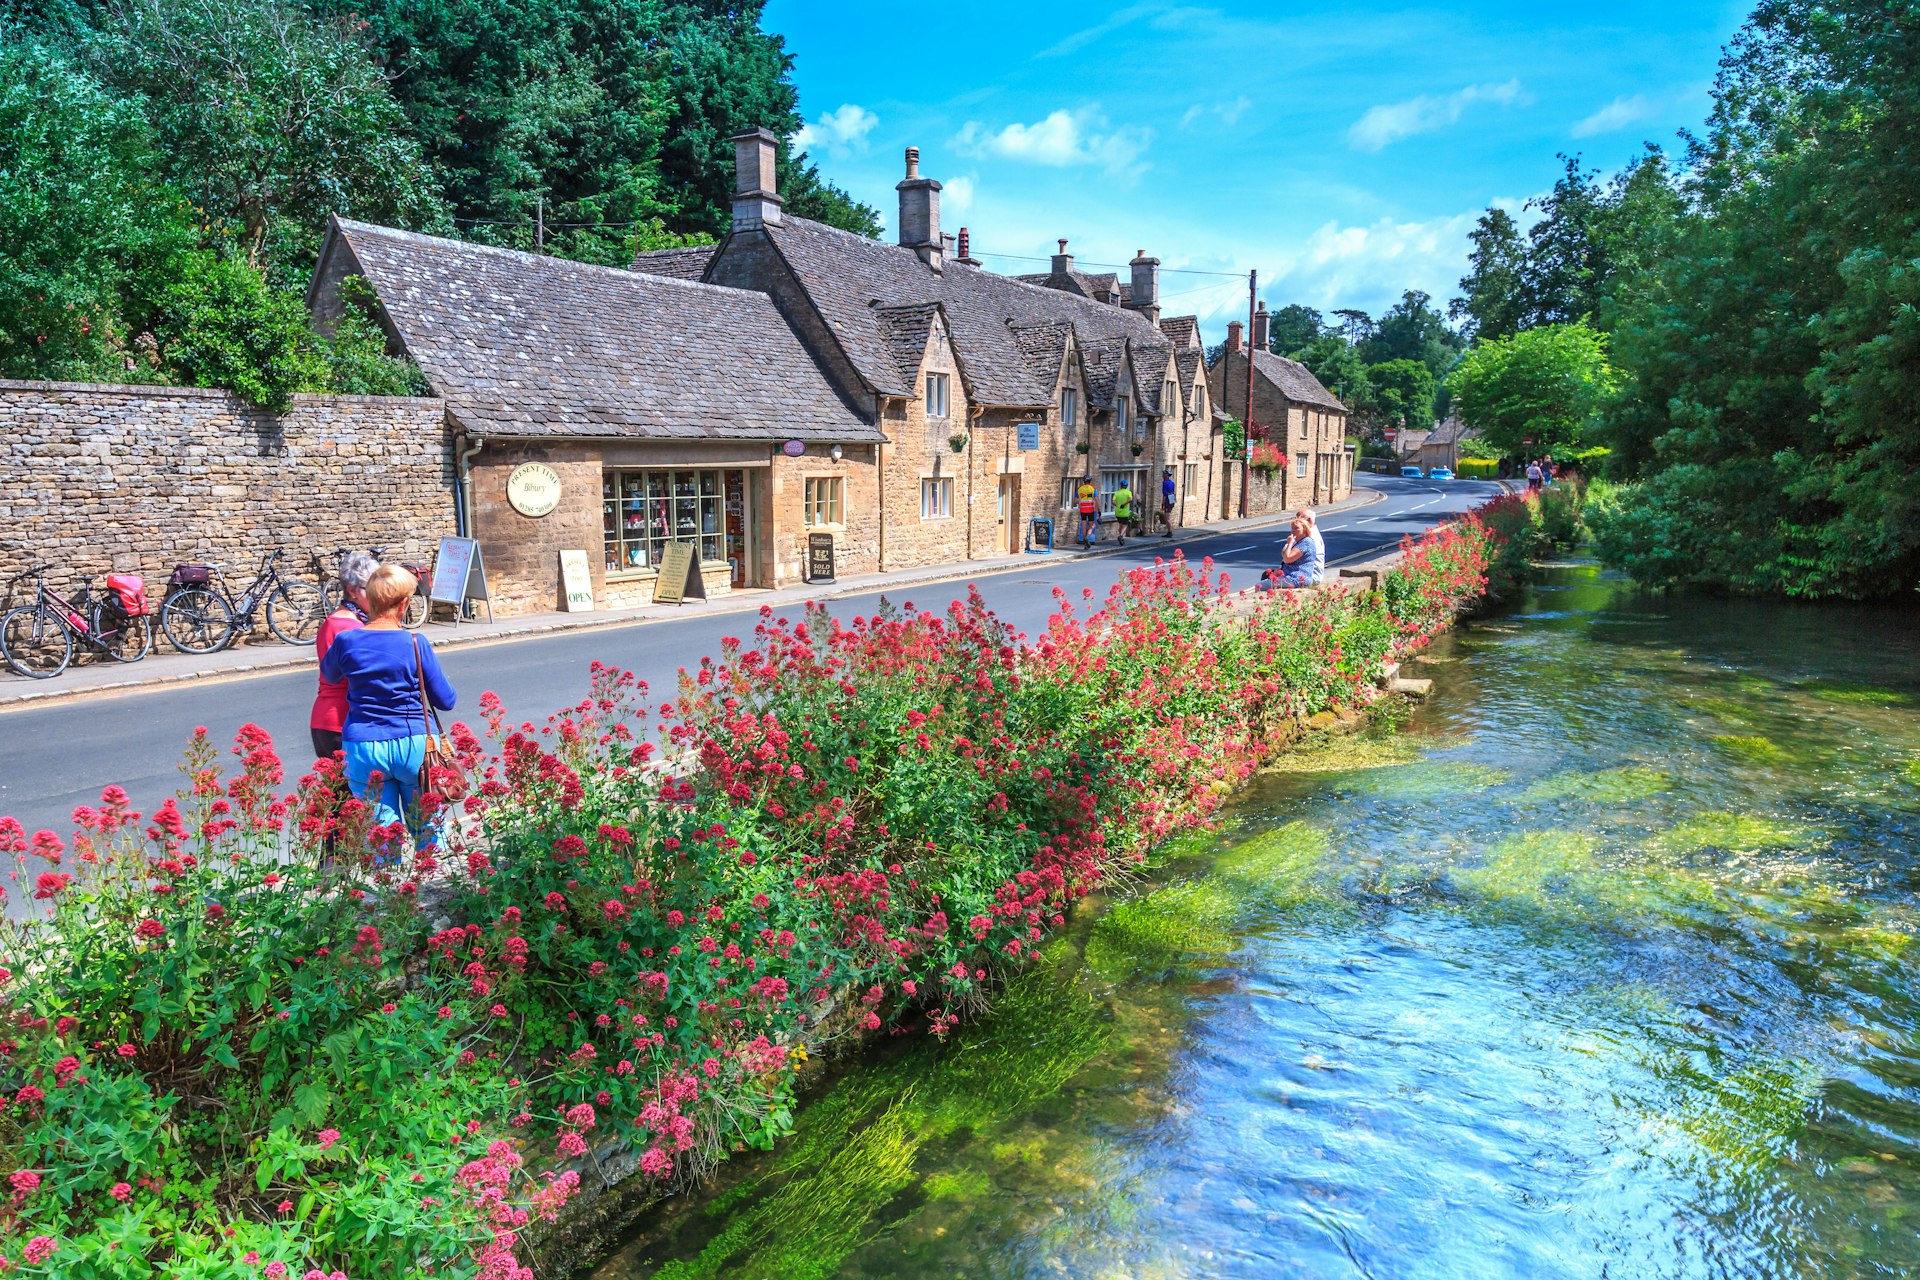 Traditional Cotswold stone cottages line a street in a quaint English village